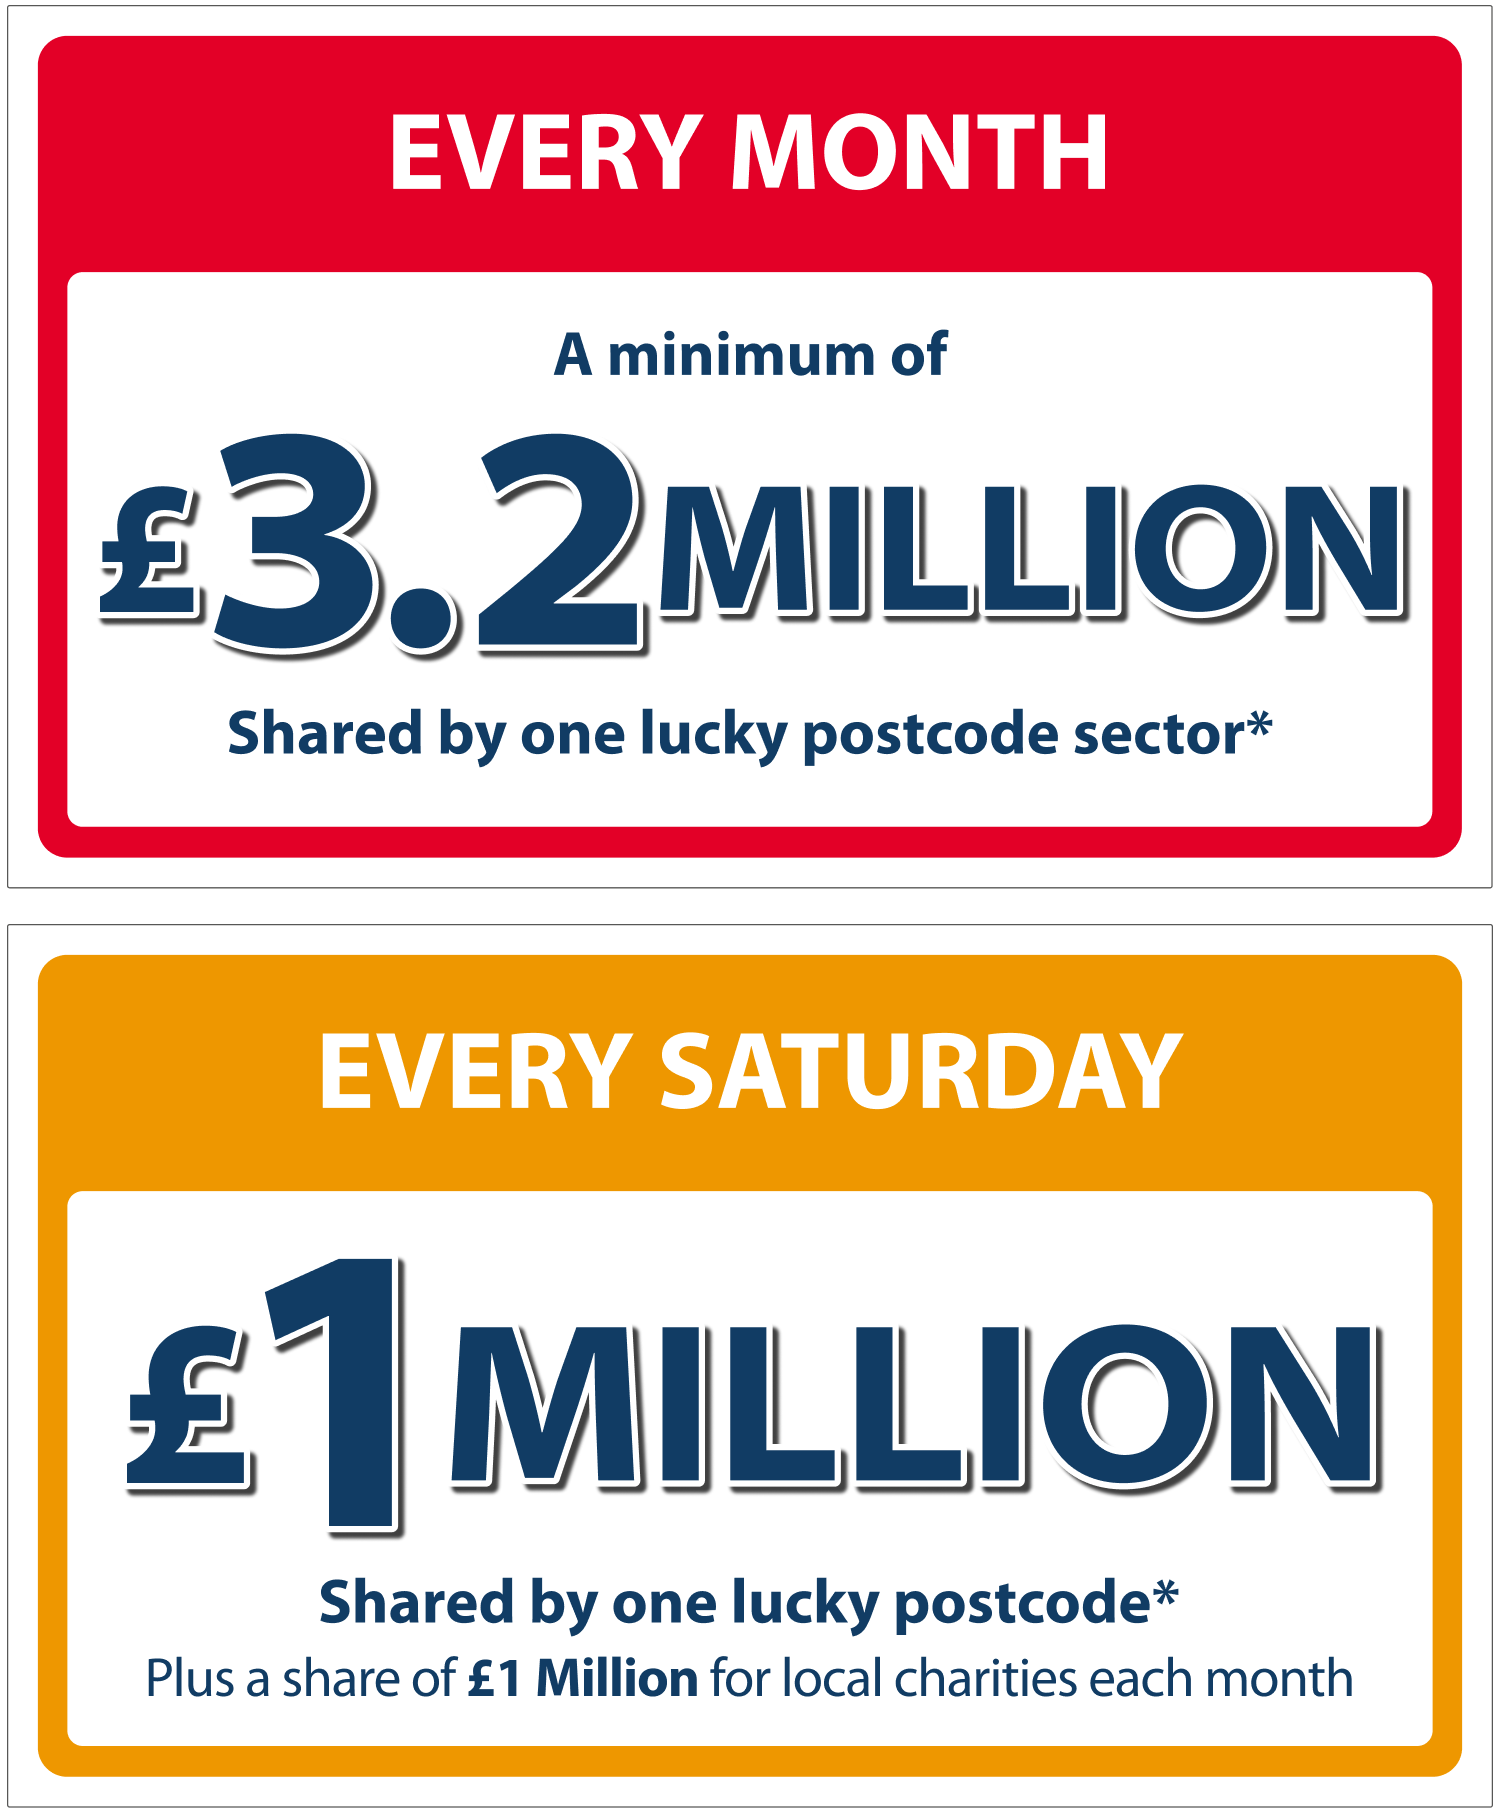 Every month a minimum of £3.2 Million shared by one lucky postcode sector. Every Saturday £1 Million shared by one lucky postcode. Plus a share of £1 Million for local charities every month.